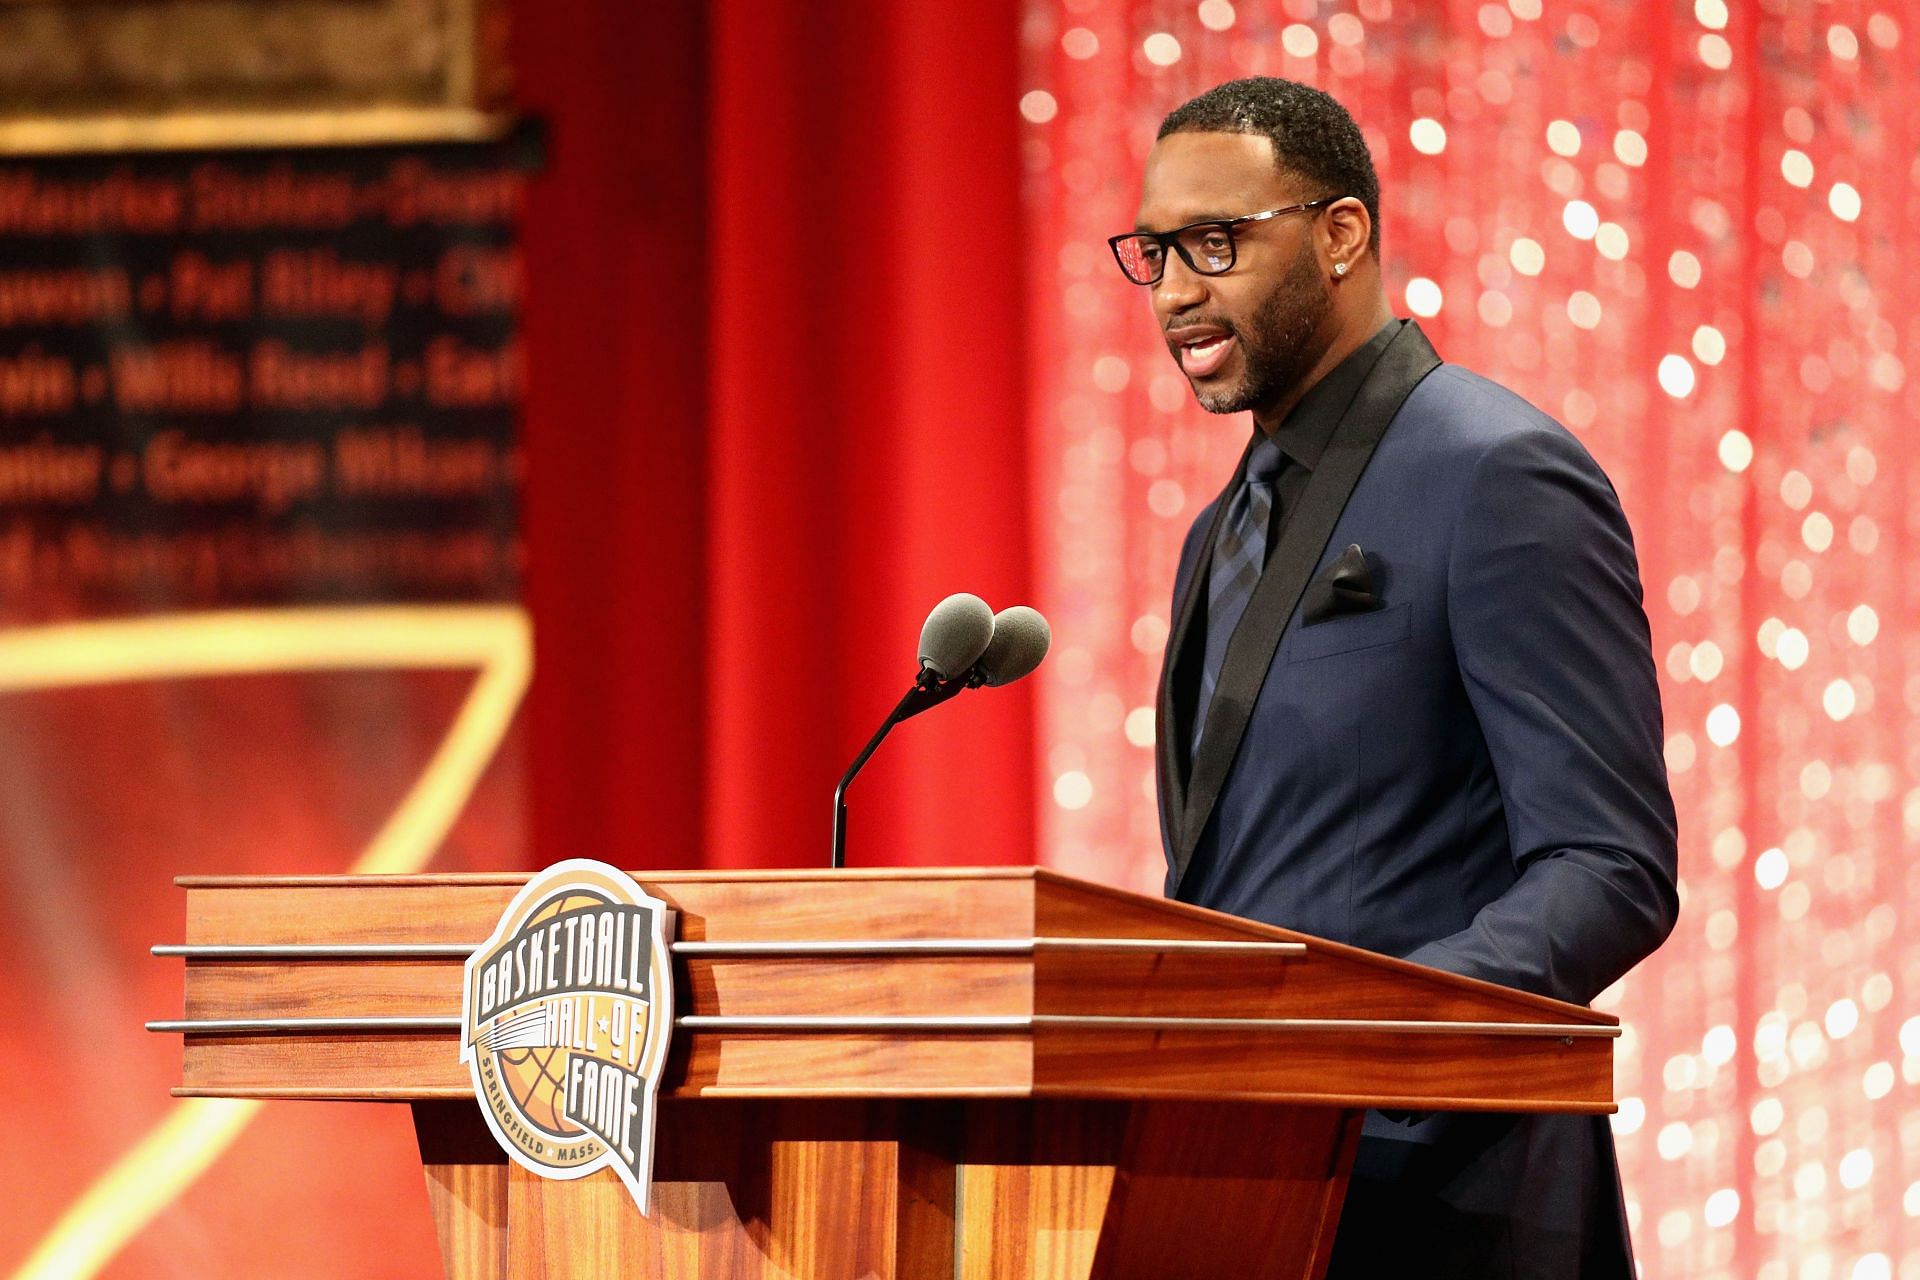 Naismith Memorial Basketball Hall of Fame Class of 2017 enshrinee Tracy McGrady speaks during the dnshrinement ceremony on Sept. 8, 2017, in Springfield, Massachusetts.